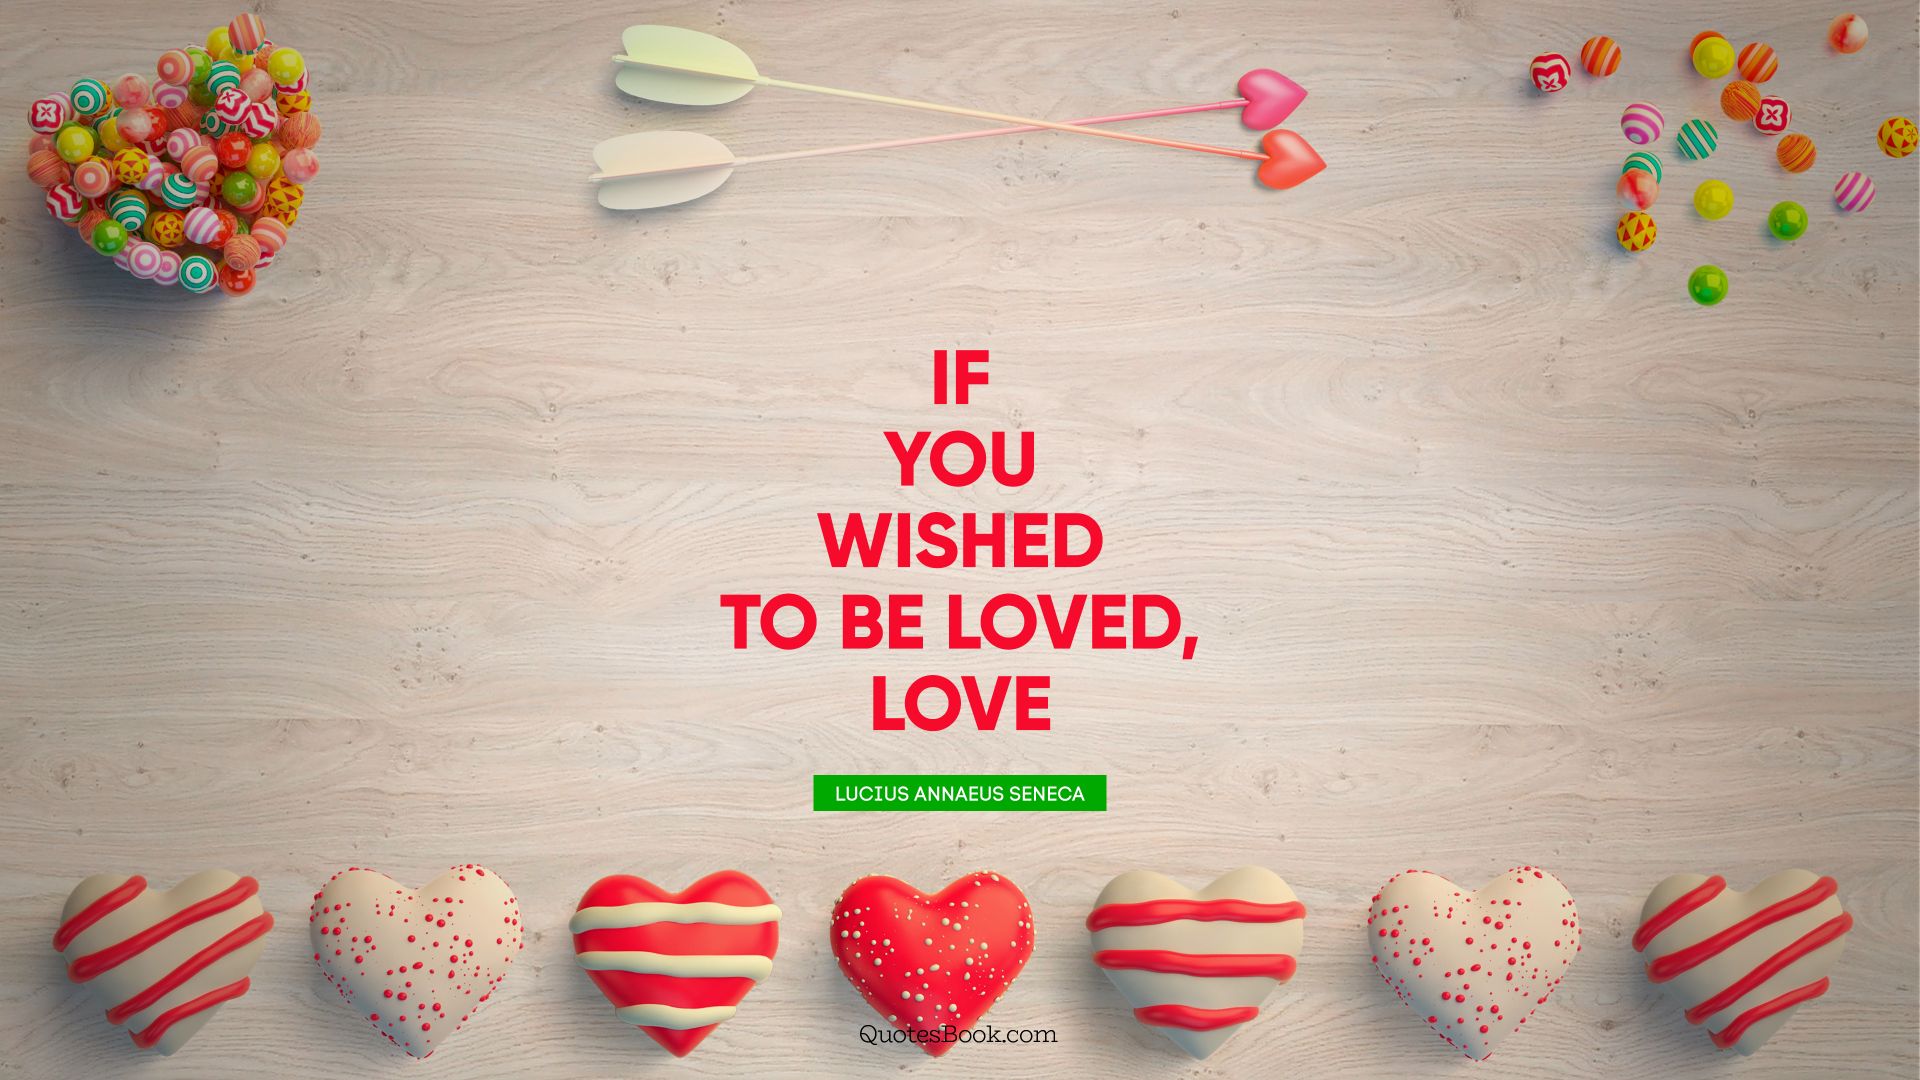 If you wished to be loved, love. - Quote by Lucius Annaeus Seneca